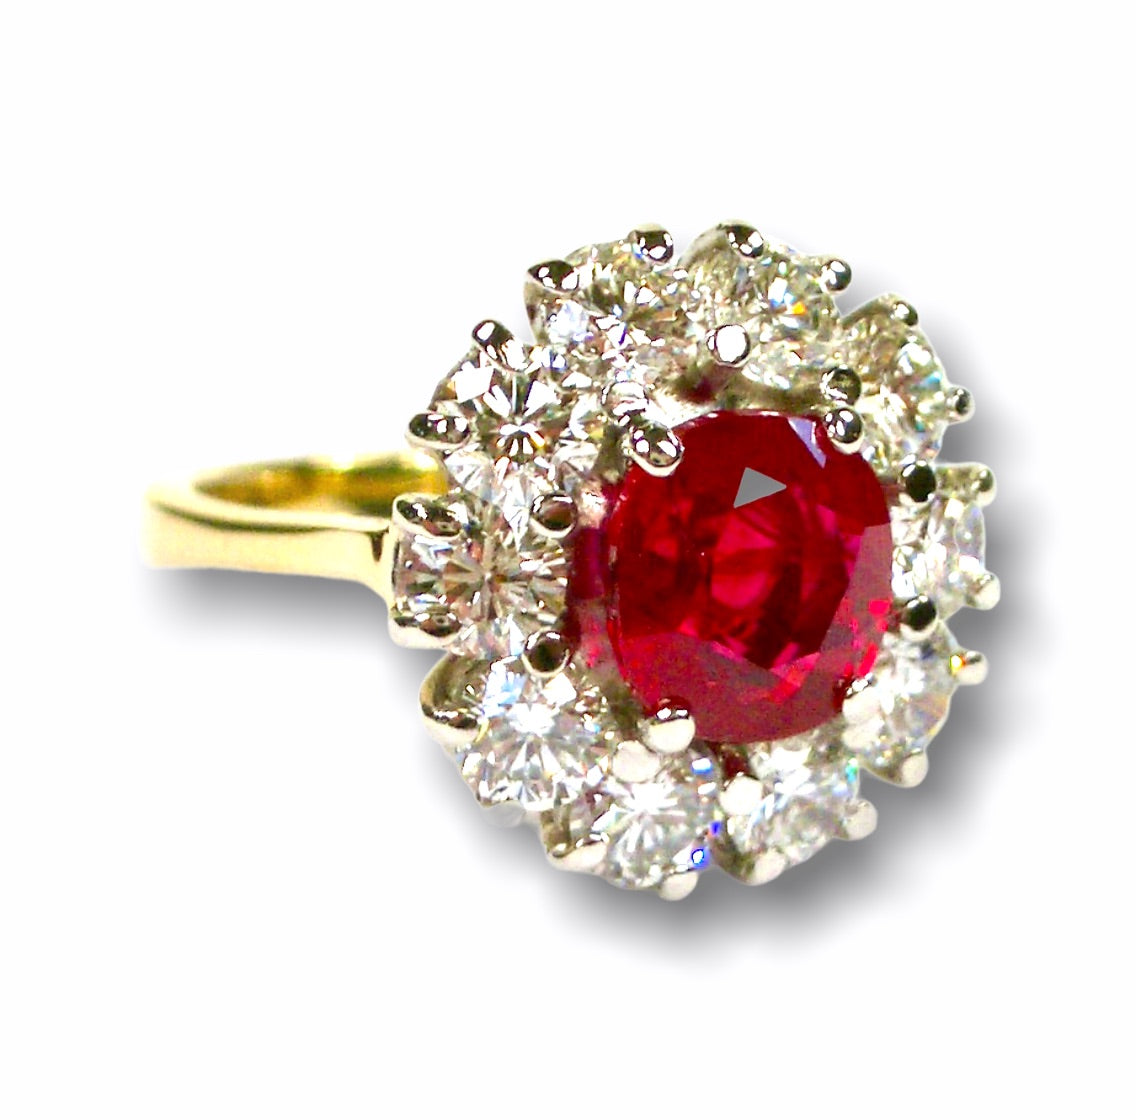 Maura's Custom Bespoke Cluster Ring Gifted By Philip For 40th Wedding Anniversary  | In 18ct Yellow Gold And Platinum | Set With A Cushion Ruby And Diamonds